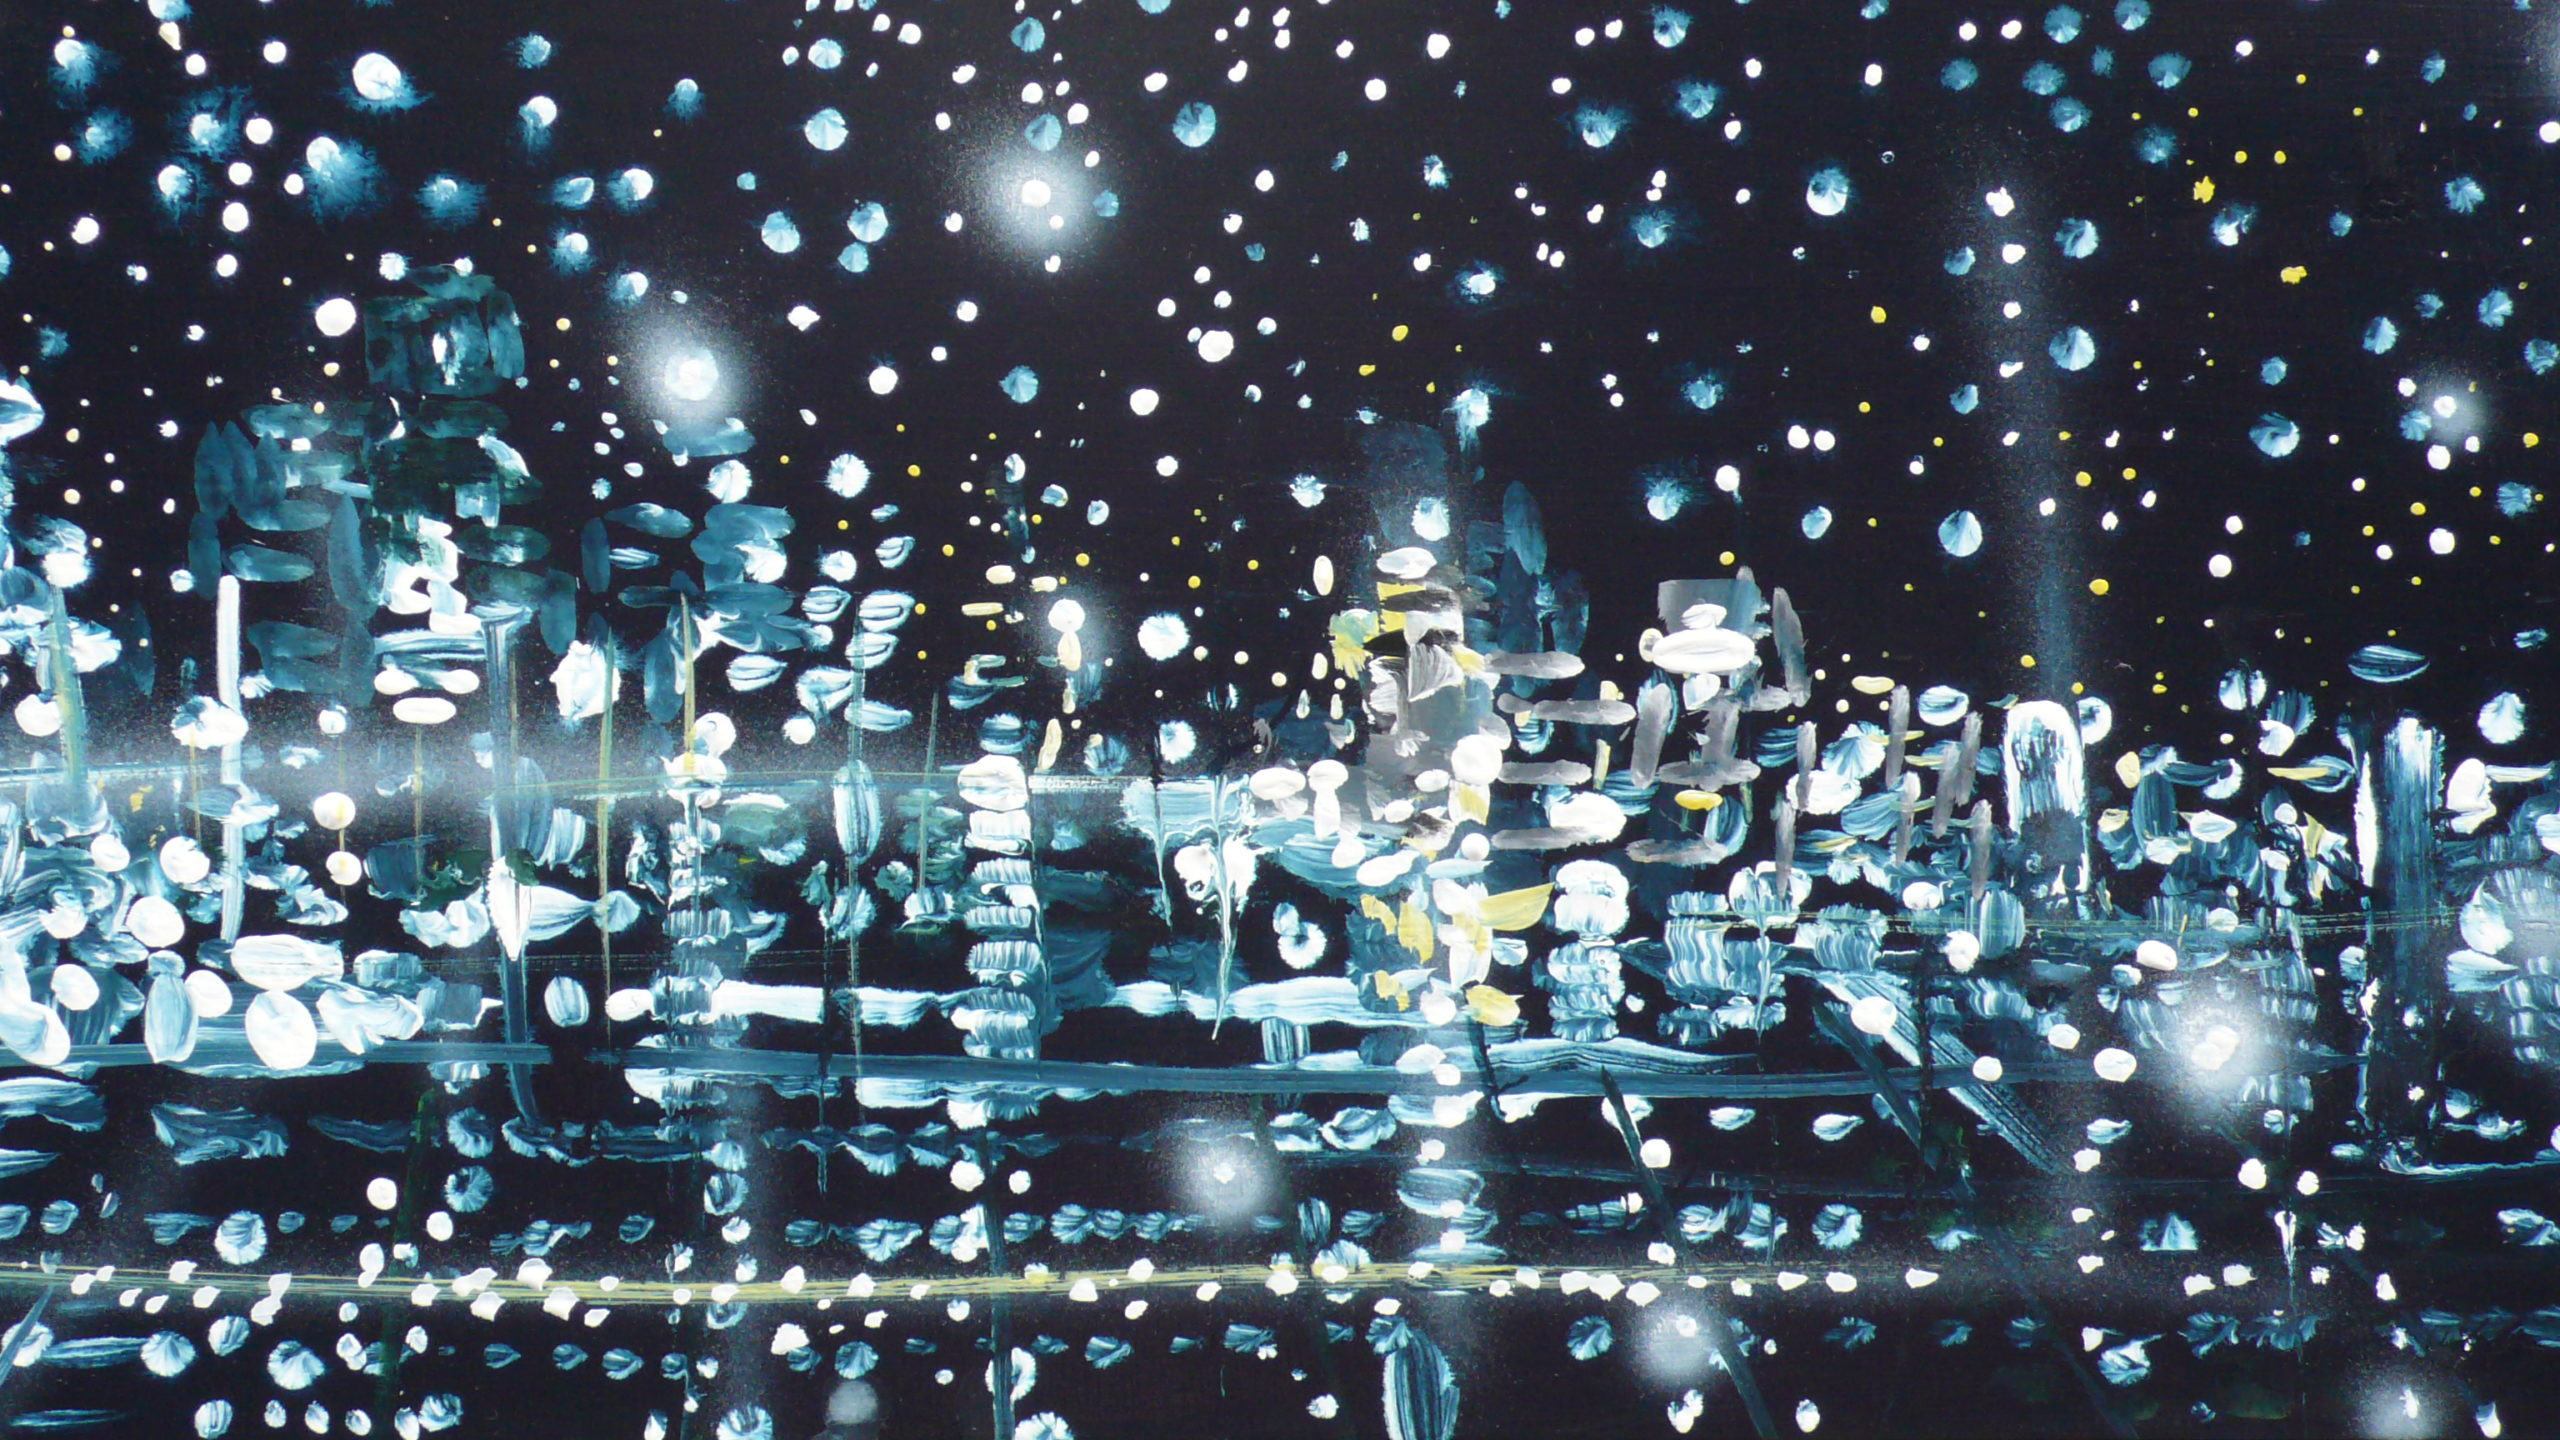 Weston Lulworth Artworks For Sale: Industrial Starlight | by Rufus | £1200